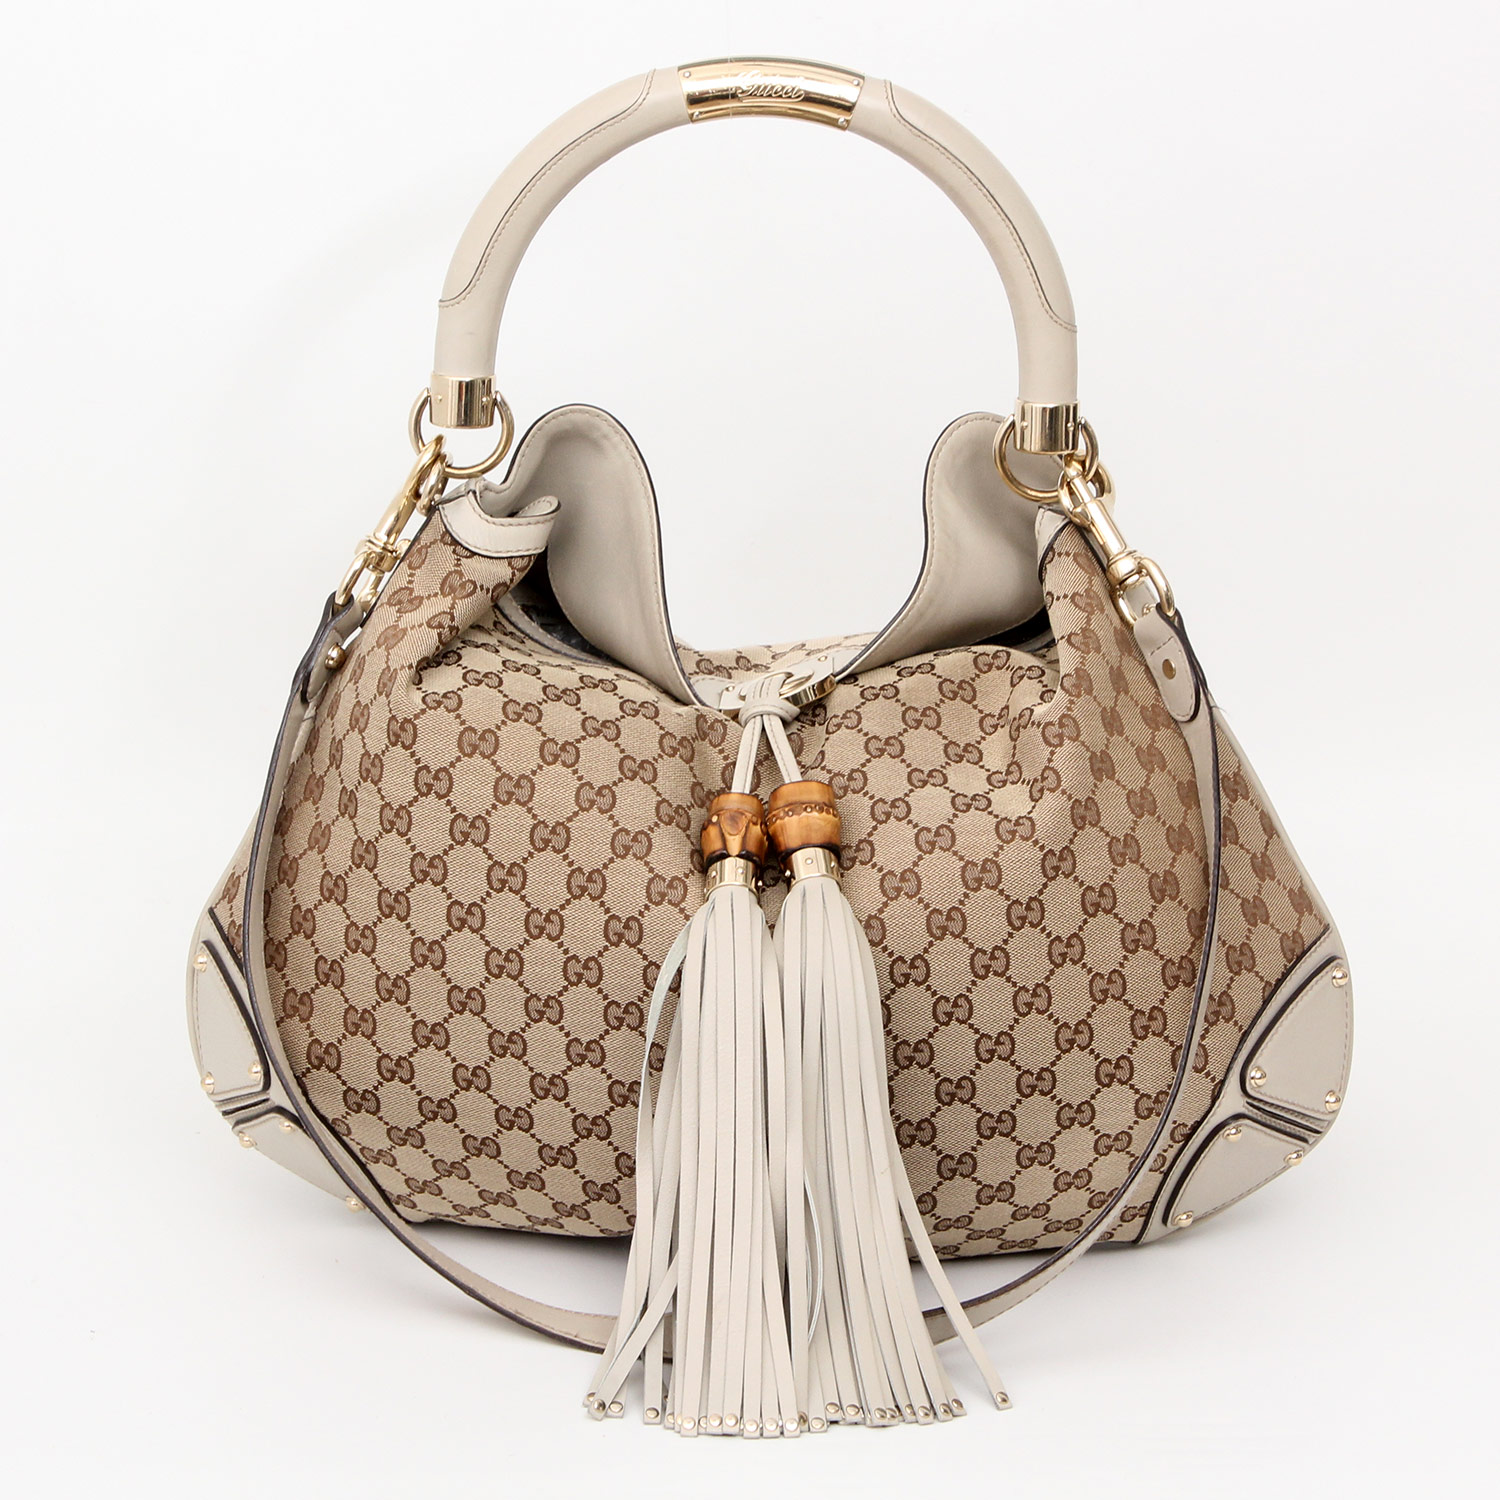 GUCCI GUCCISSIMA tolle Handtasche TASSEL&BAMBOO INDY HOBO-BAG, NP: ca. 1800.-! ca. 50x40cm, grau,